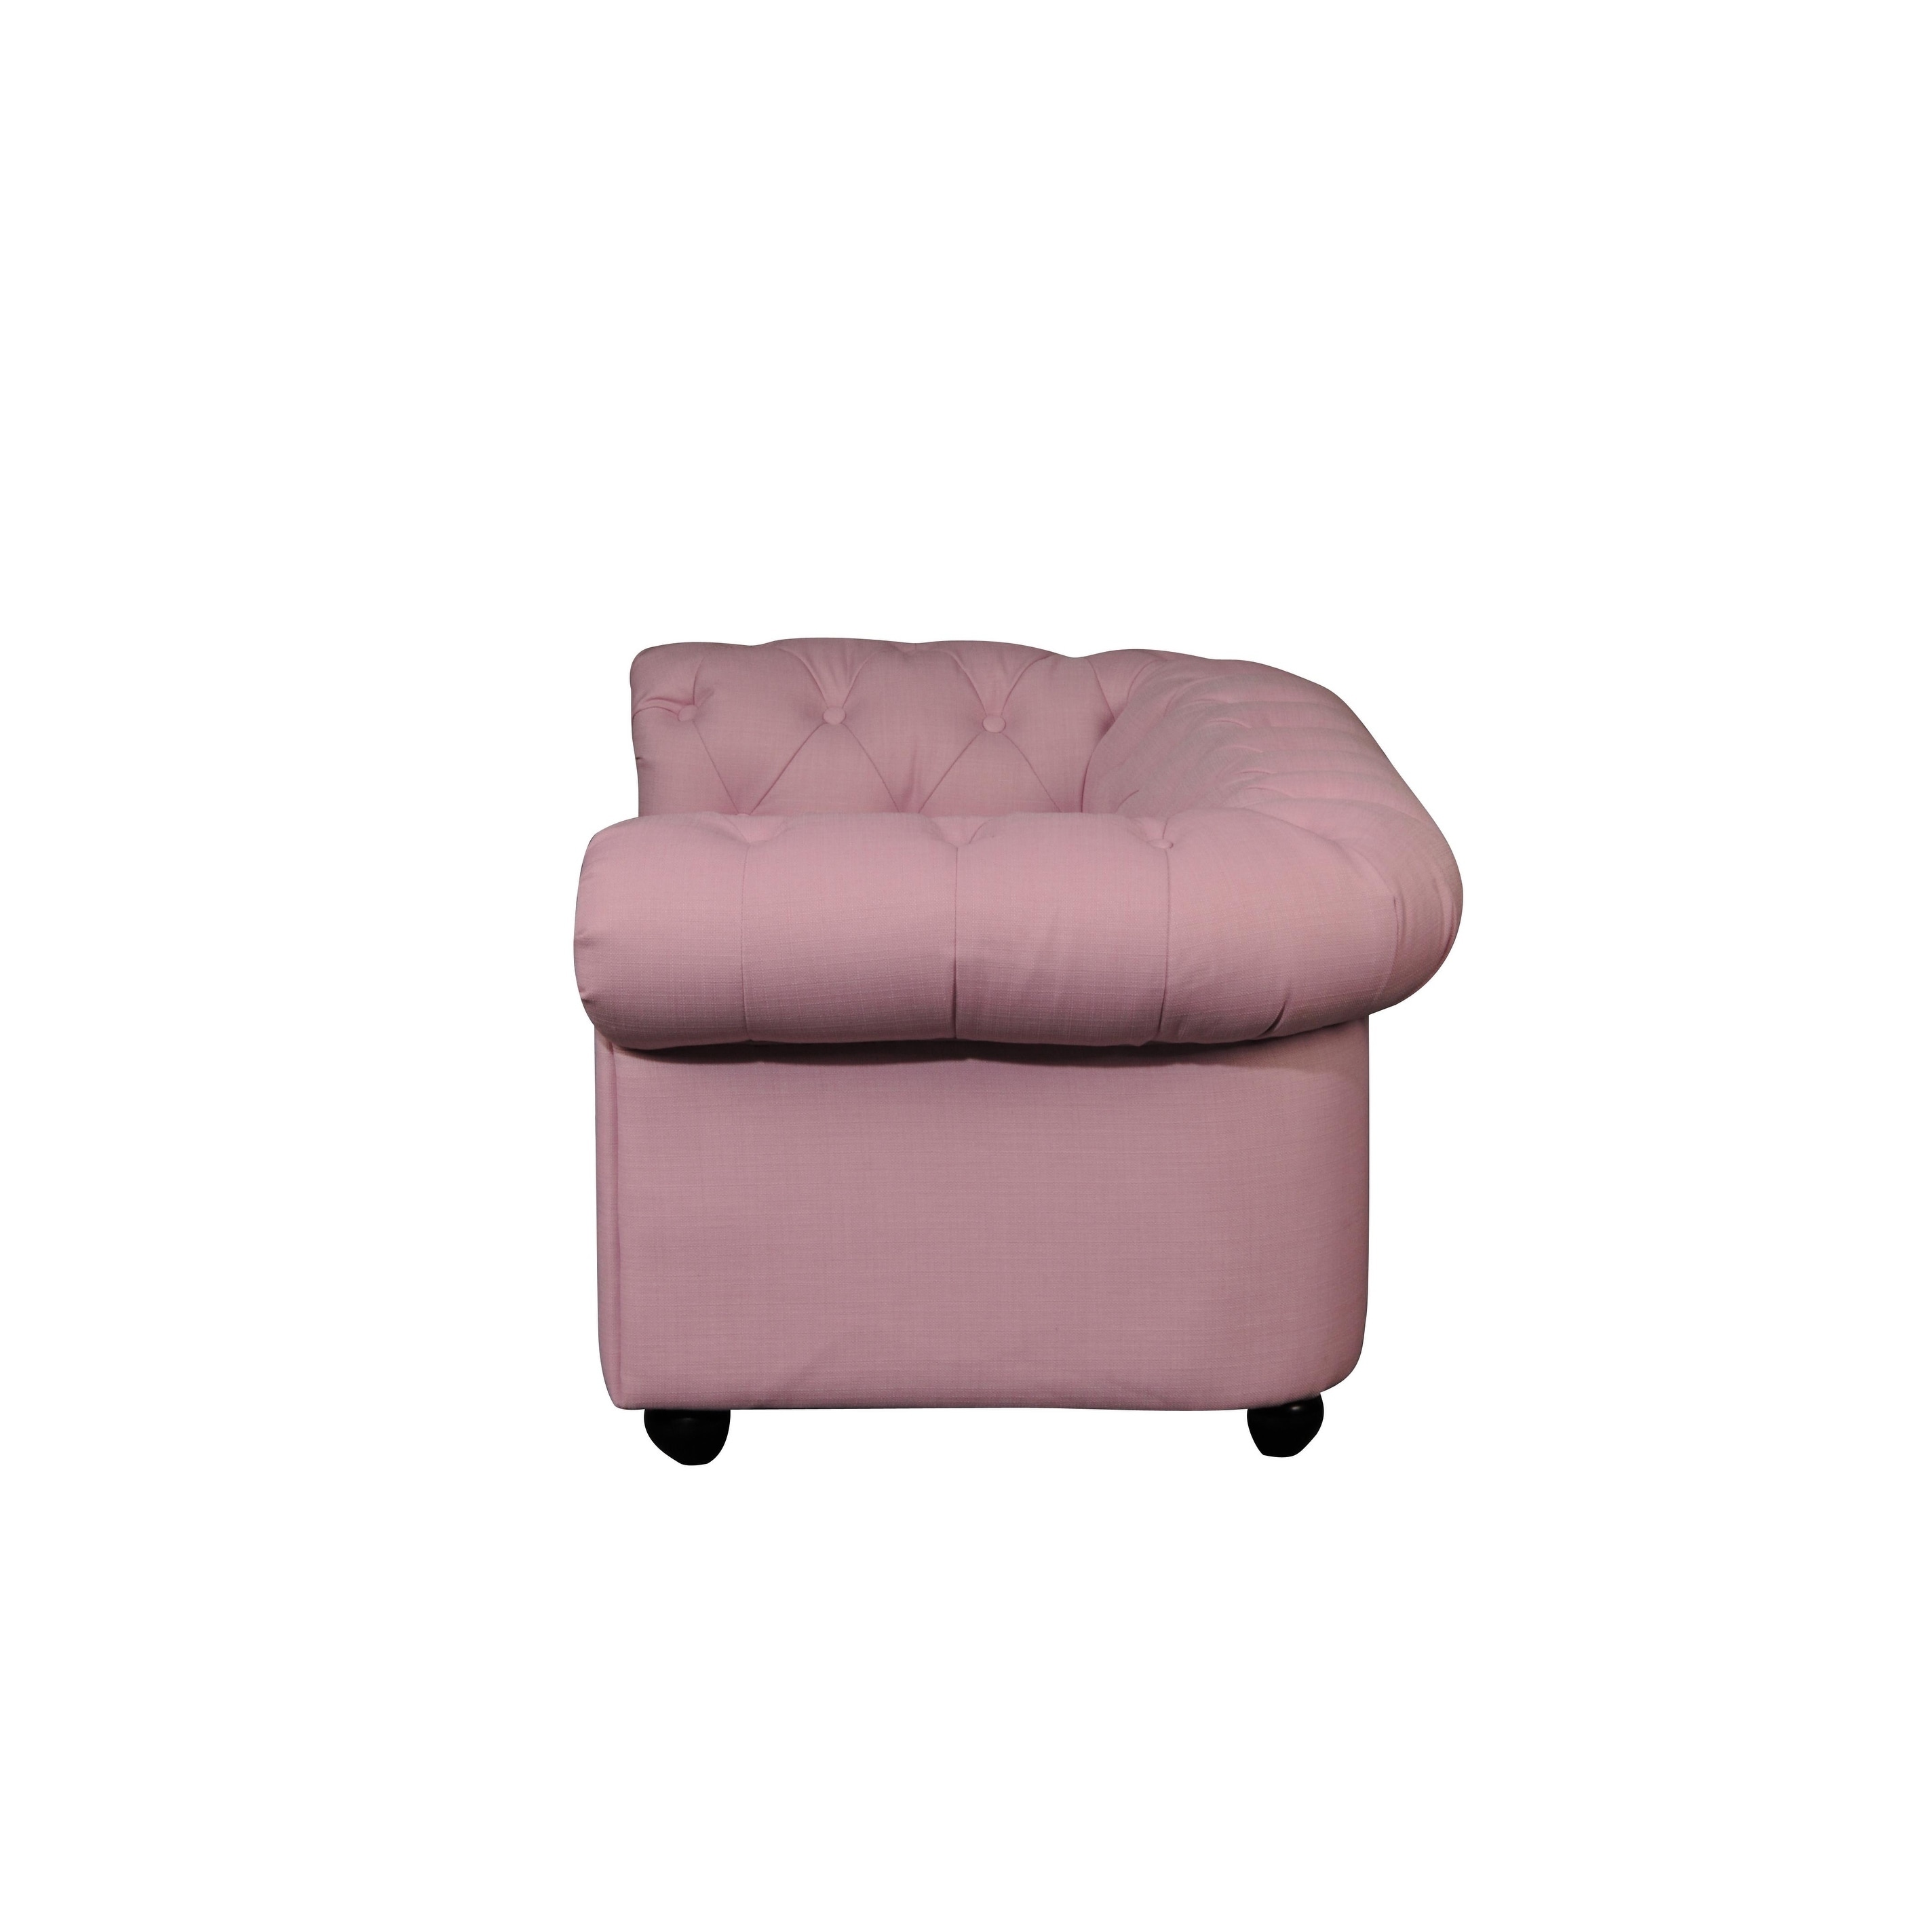 Shop Chester Children S Sofa In Pink Fabric Overstock 26263382